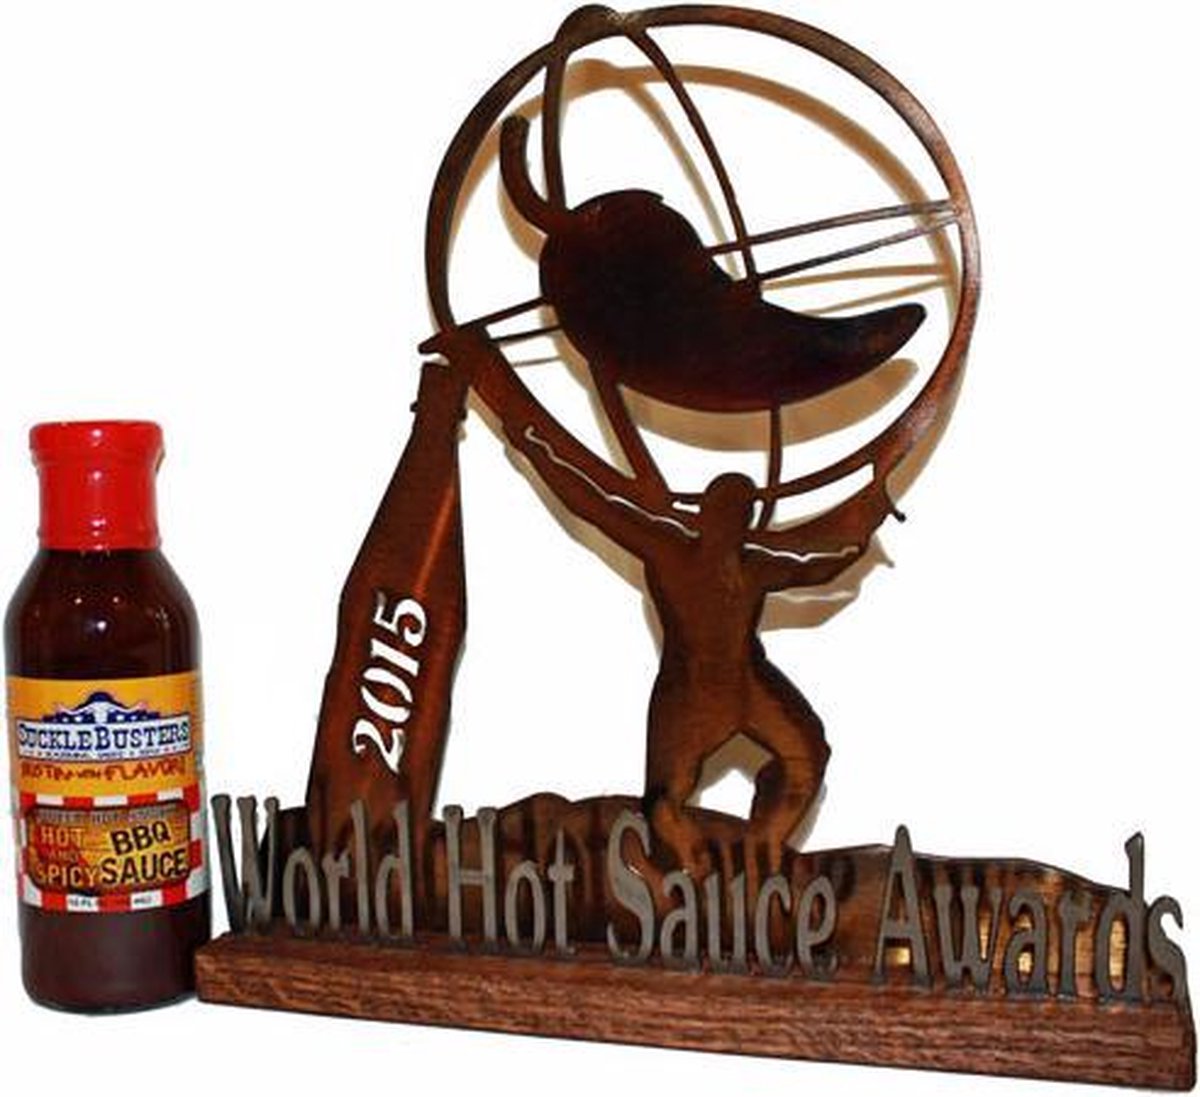 SuckleBusters Hot & Spicy BBQ Sauce 354ml.